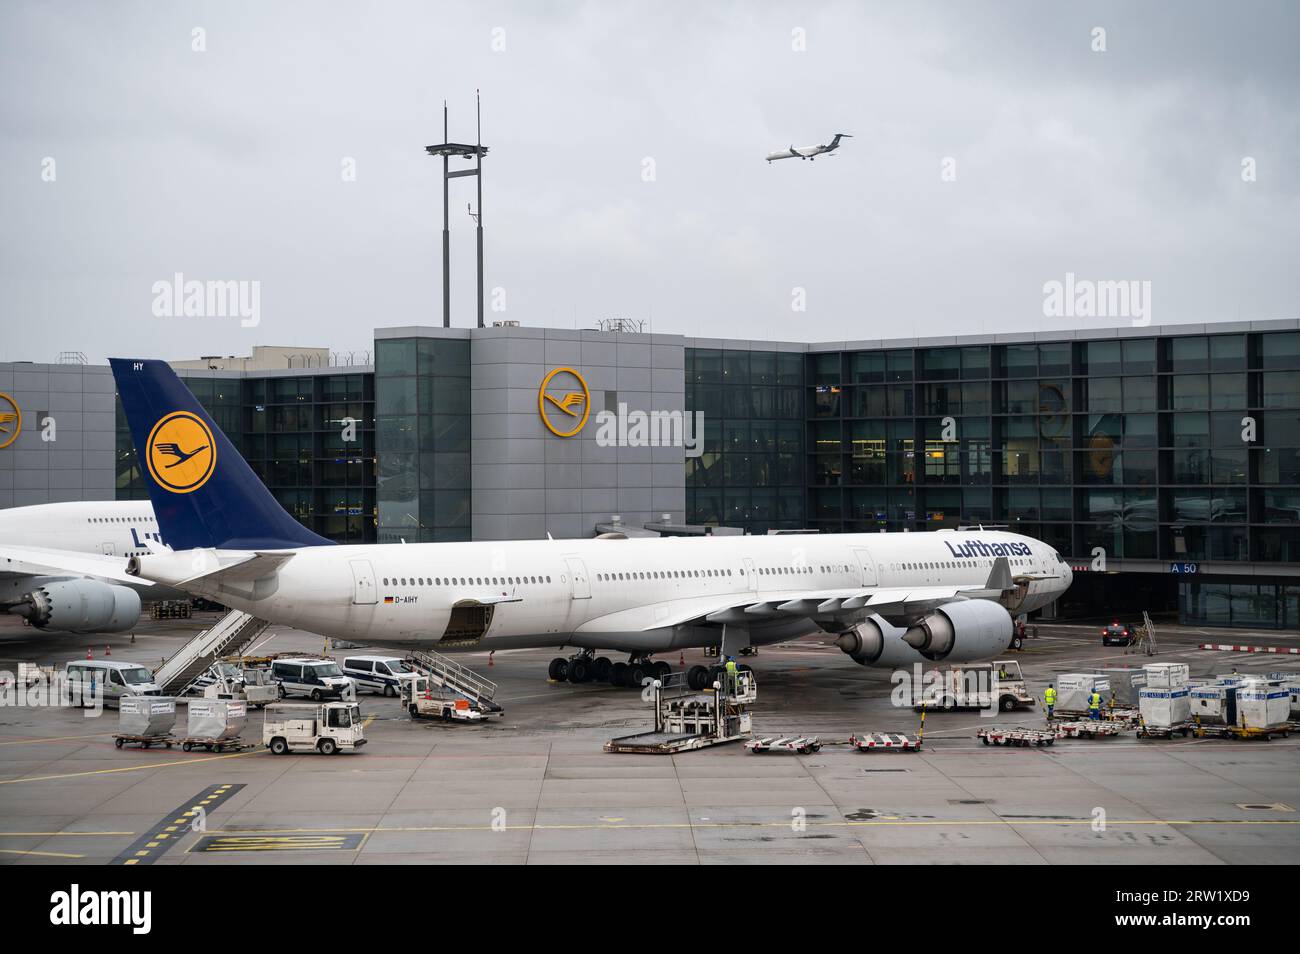 04.08.2023, Germany, , Frankfurt - Europe - A Lufthansa passenger aircraft of the type Airbus A340-600 with the registration D-AIHY parks at the gate Stock Photo